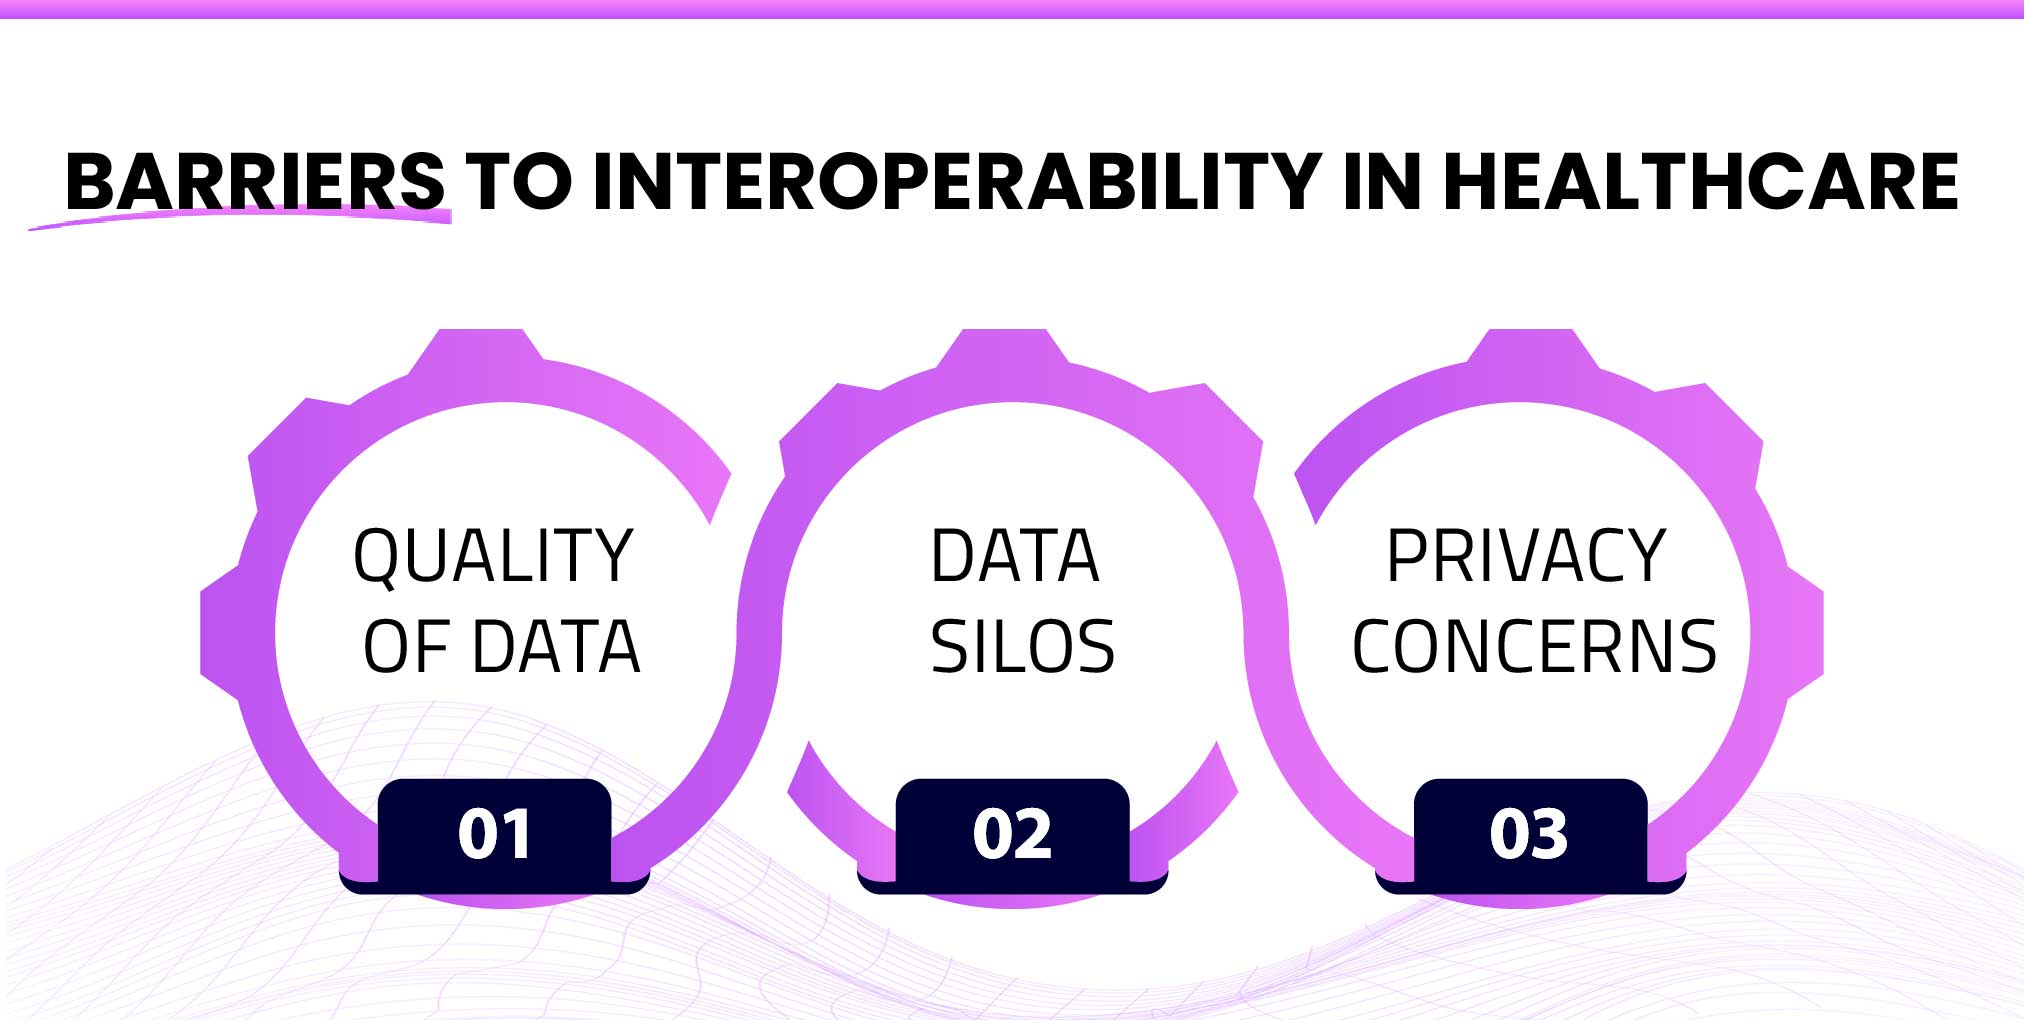 Barriers to Interoperability in Healthcare
